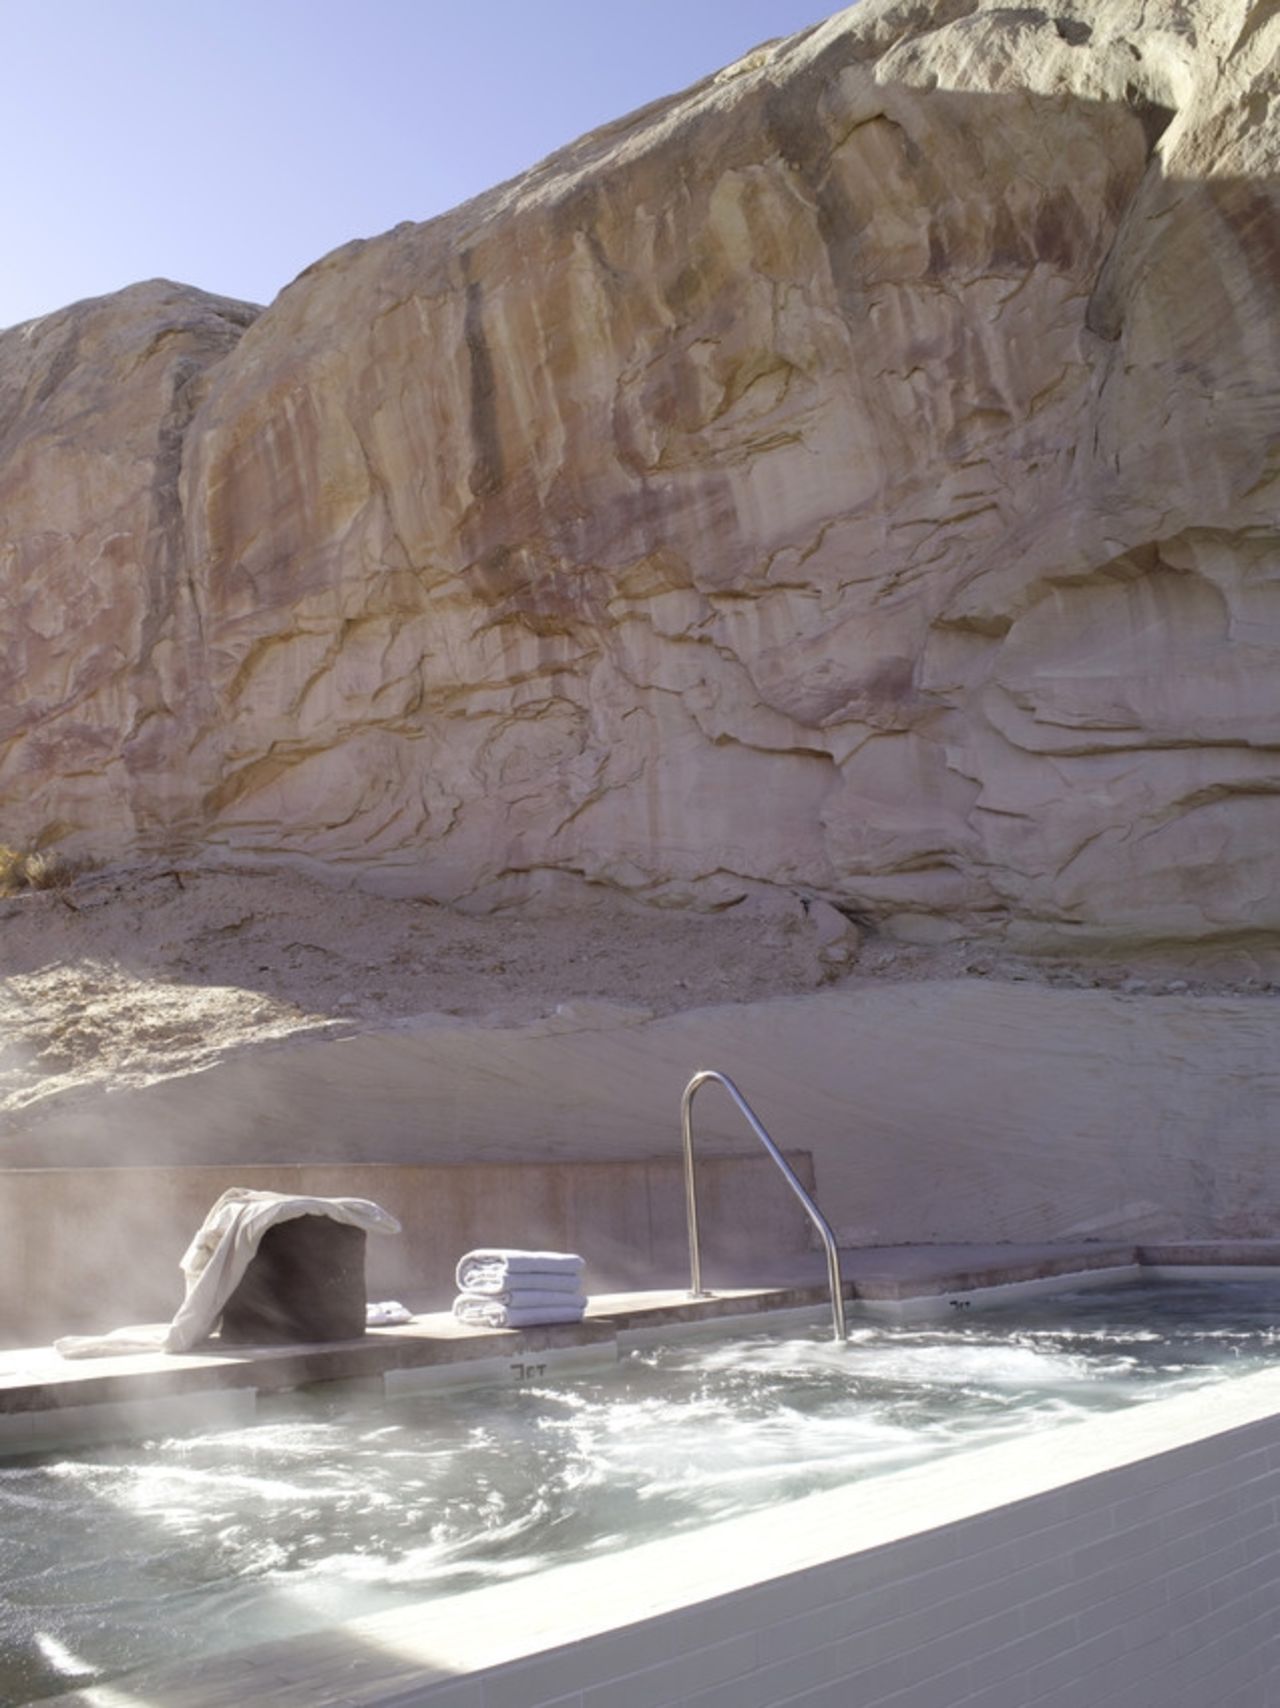 Amangiri has reportedly welcomed some of the world's most famous celebs, including the Jolie-Pitts.